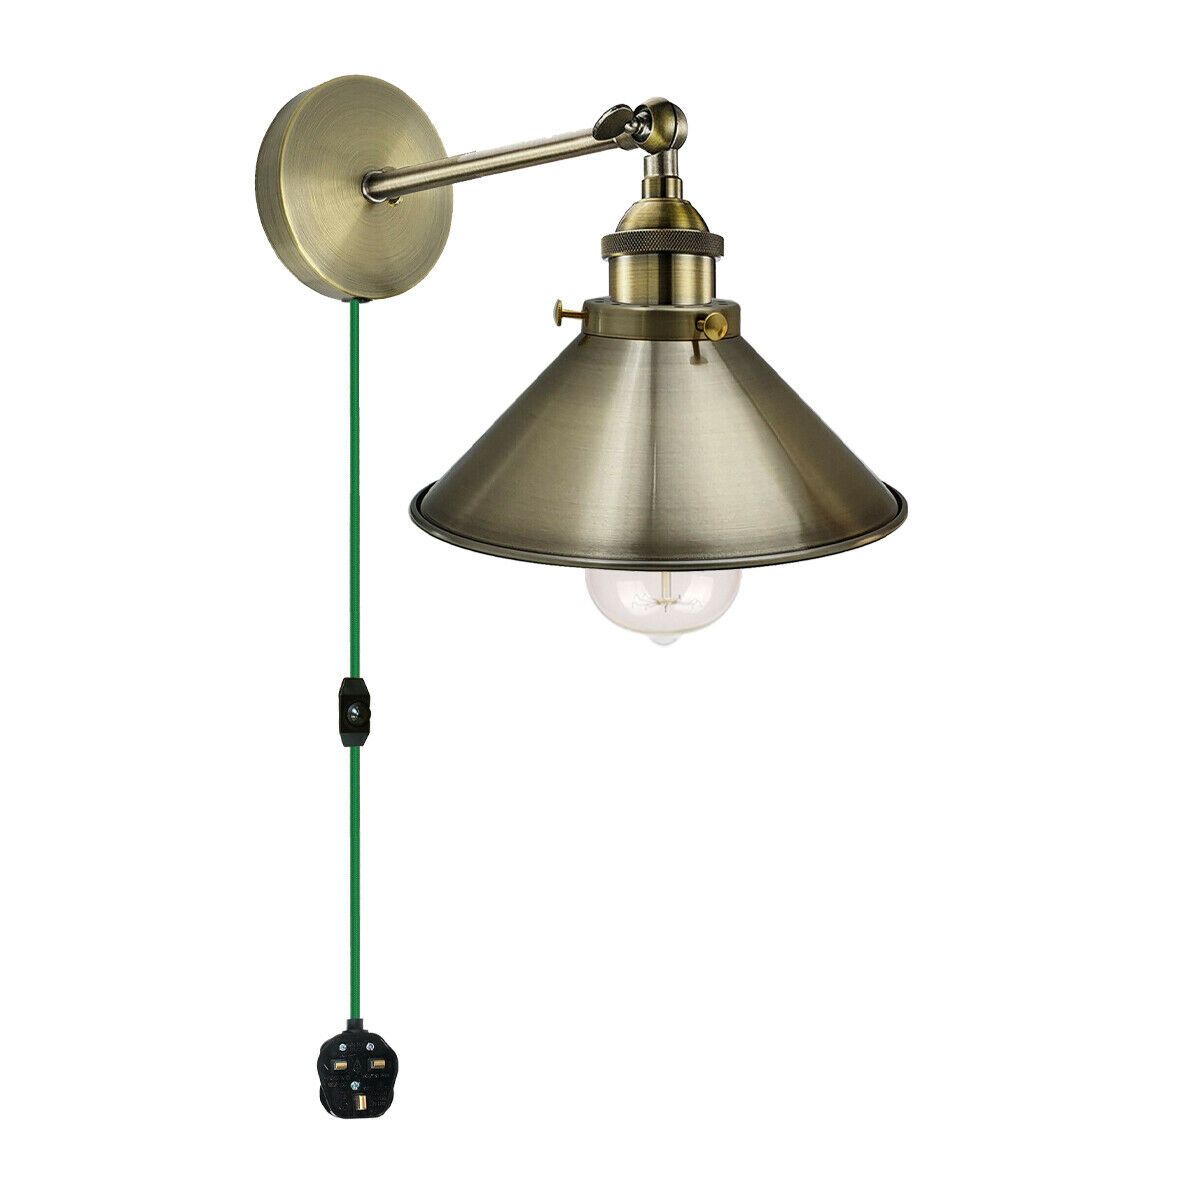 Vintage Green Brass Cone Lamp Shade-E27 Holder & Plug-In Dimmer Switch